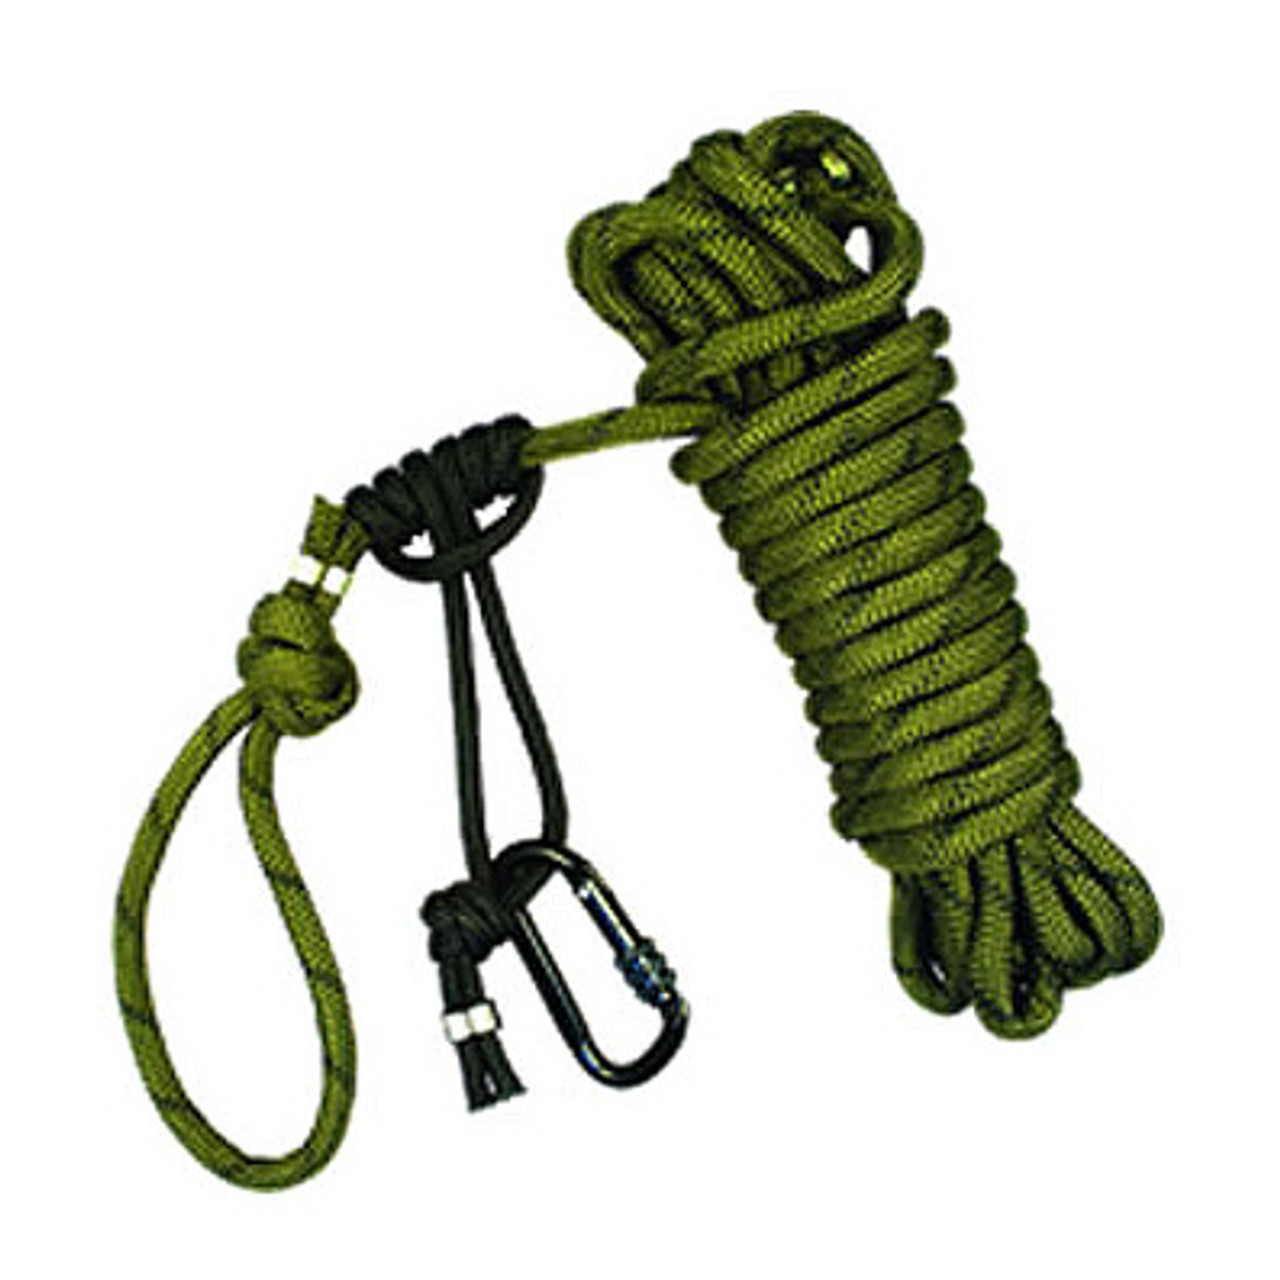 Safelink 35' Safety Rope by Millennium Outdoors